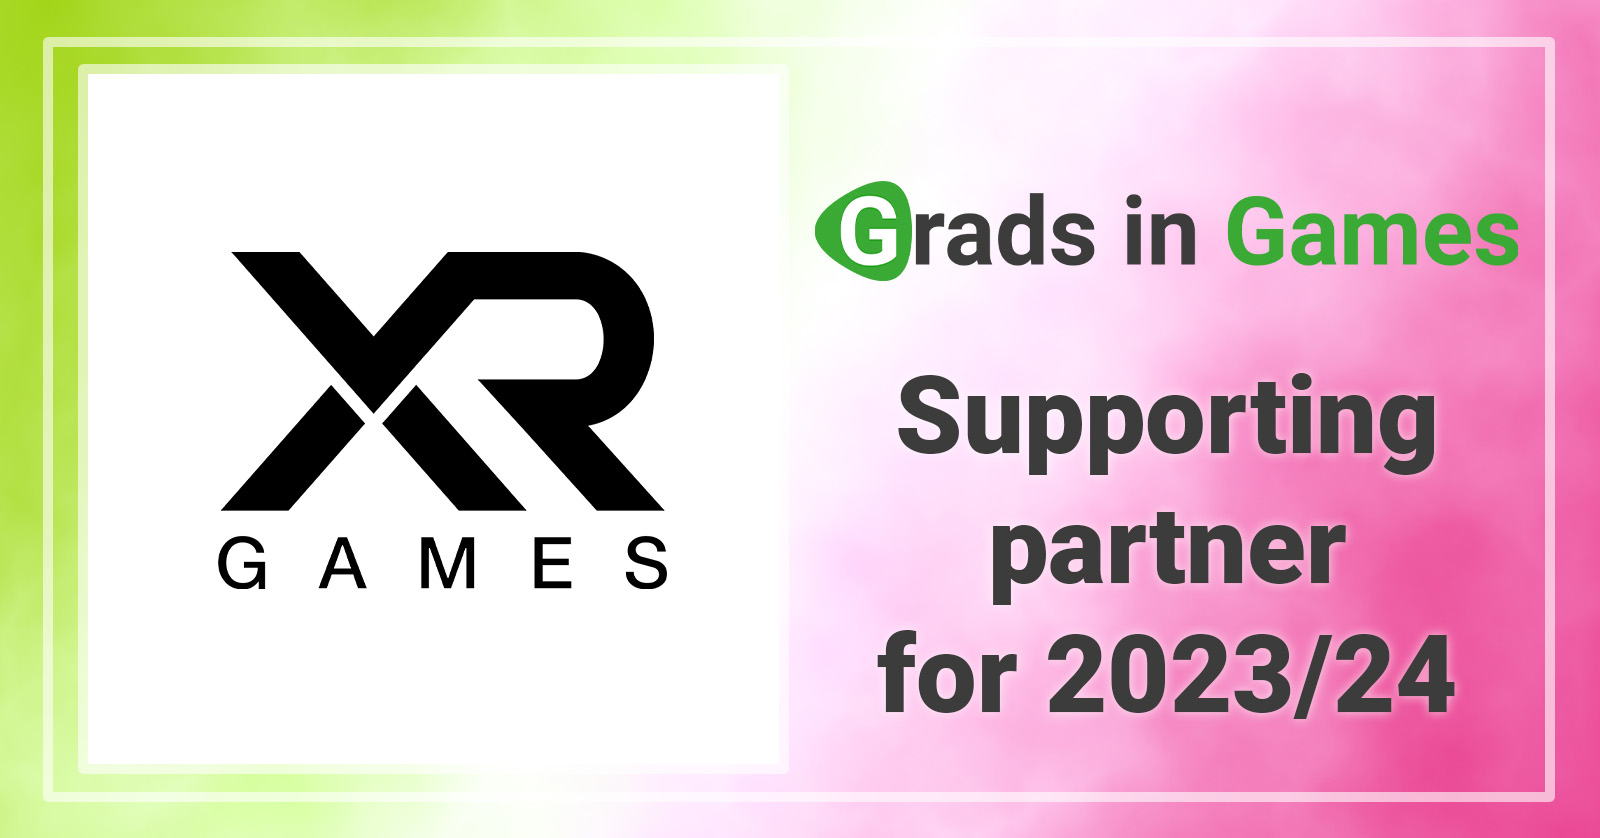 Welcome to XR Games as a Supporting Partner!